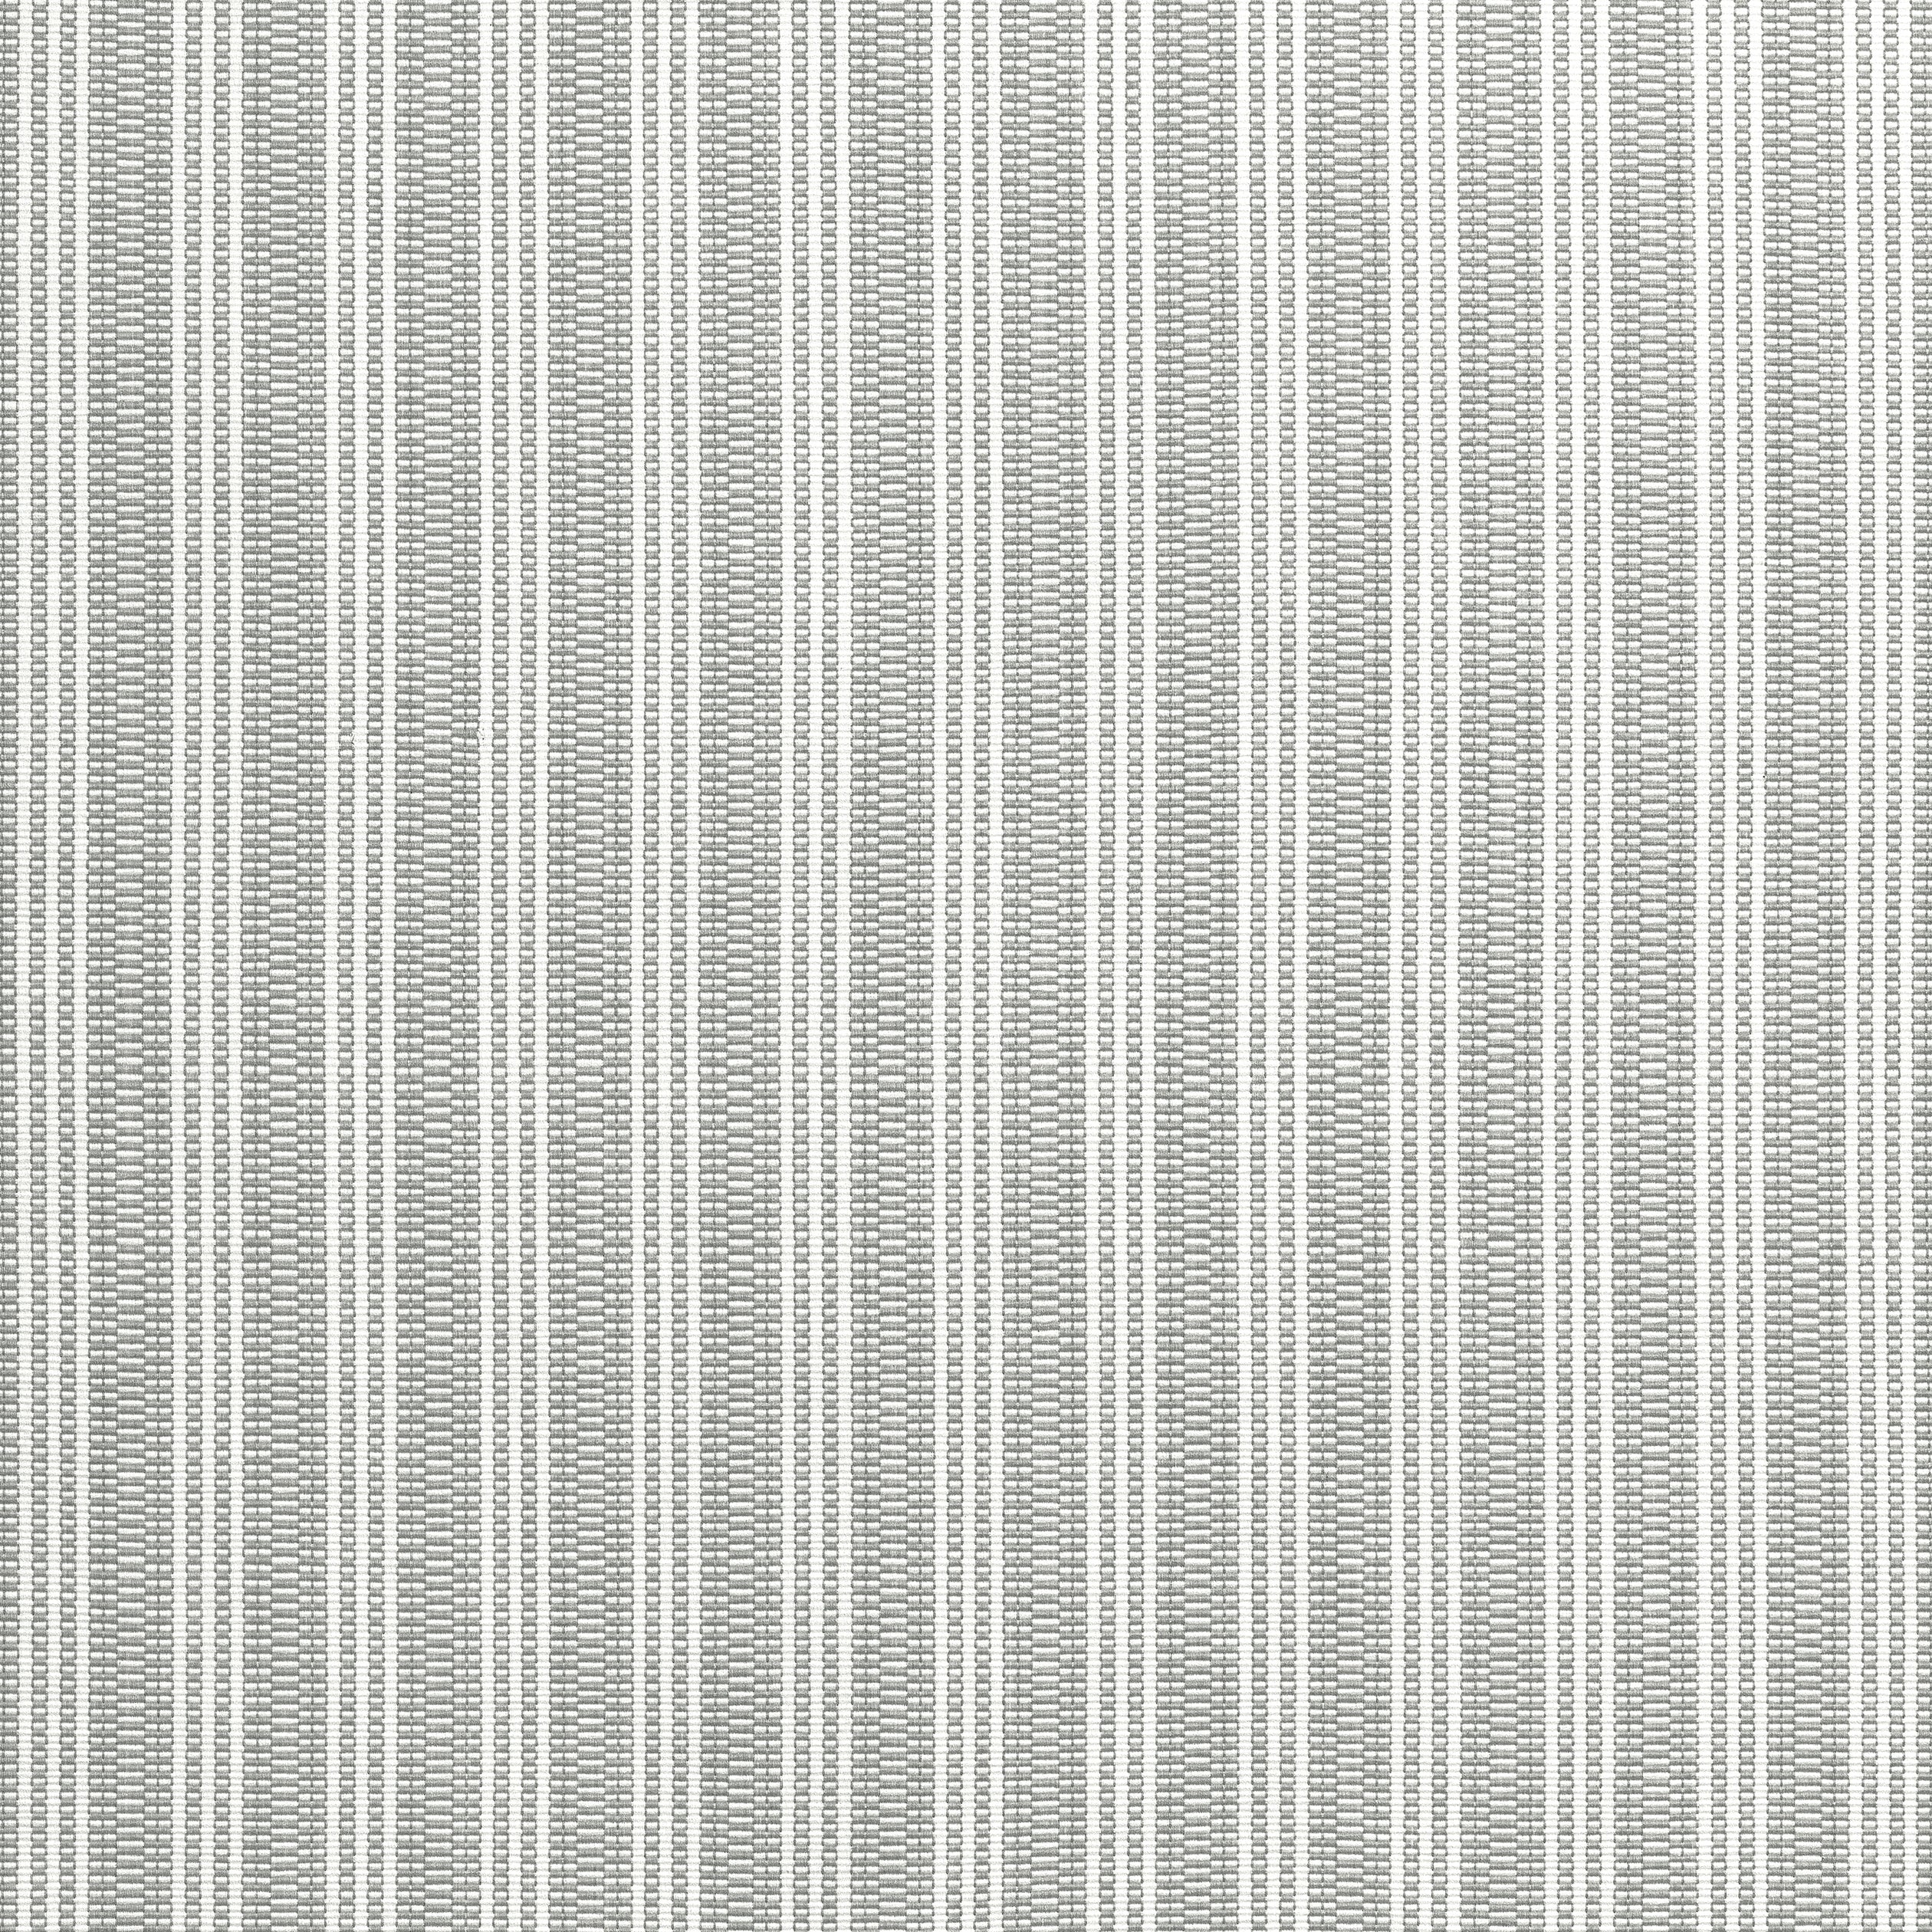 Reed Stripe fabric in grey color - pattern number AW9846 - by Anna French in the Nara collection